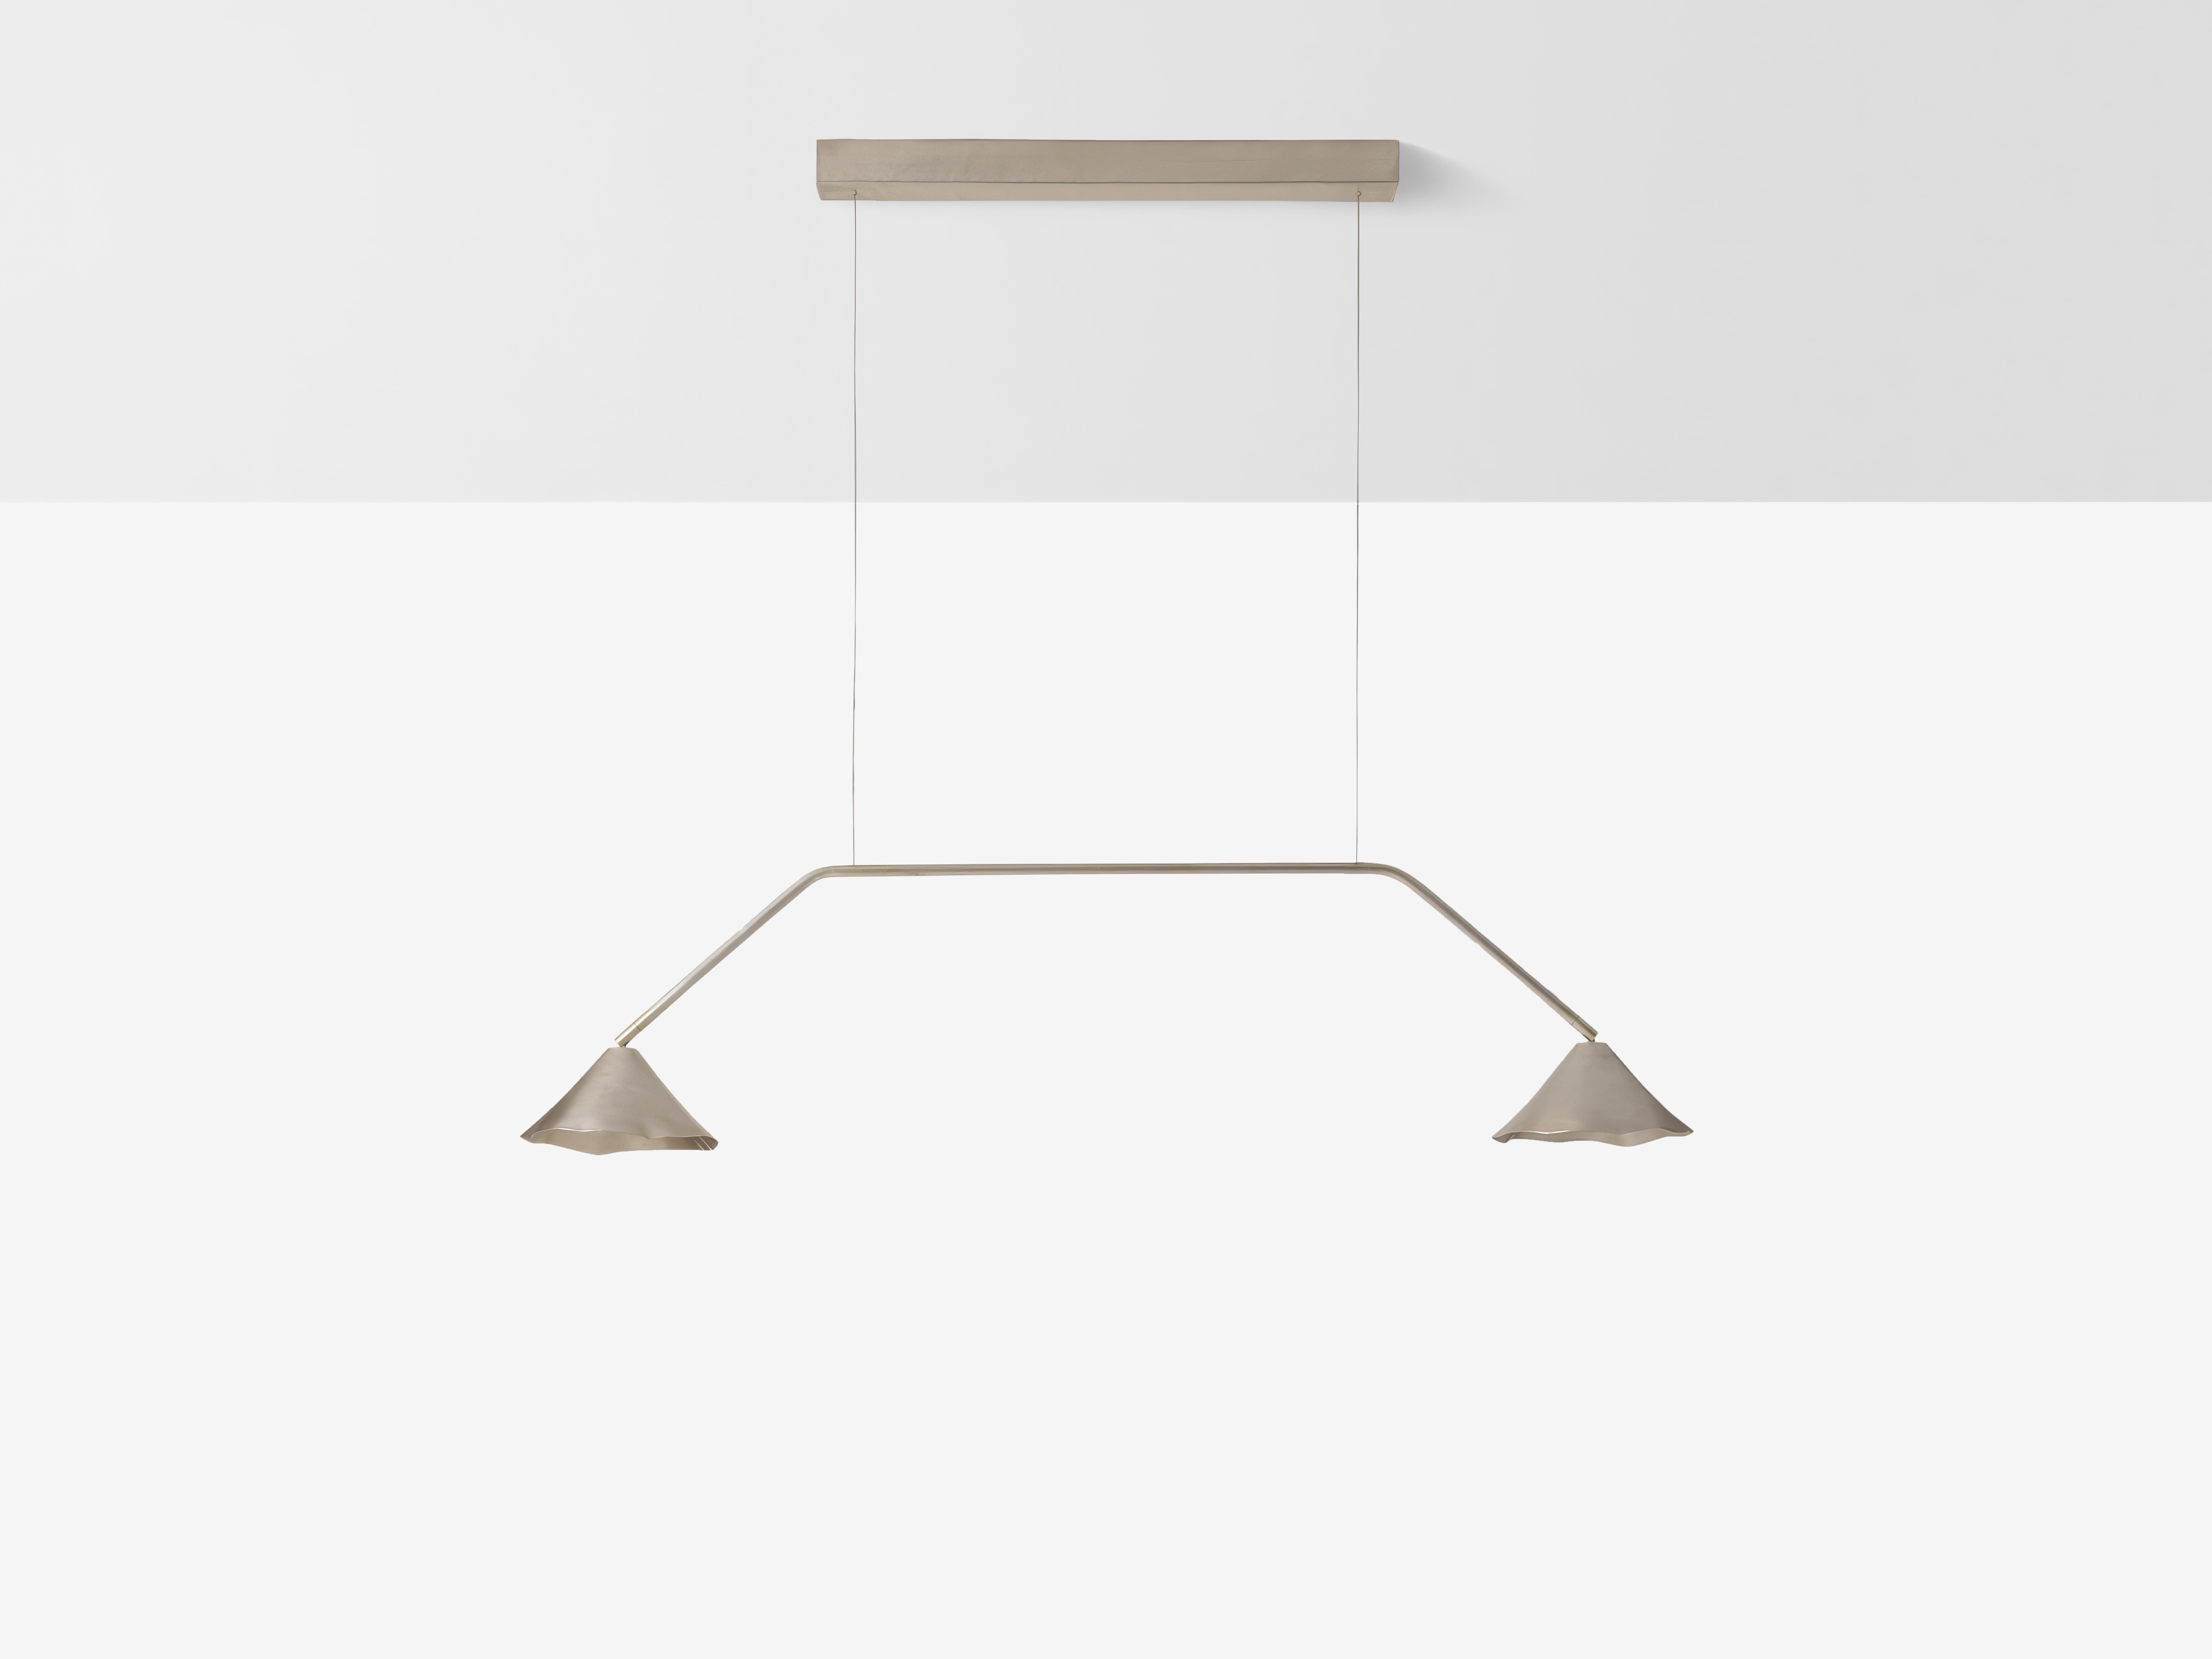 Silver Antica IV Linear Pendant by OHLA STUDIO
Dimensions: D 25 x W 145 x H 26 cm 
Materials: Copper.
5 kg

Available in other finishes: Silver, Forest, and Teal.

A pre-Hispanic smithing tradition thrives by recycling copper scraps into